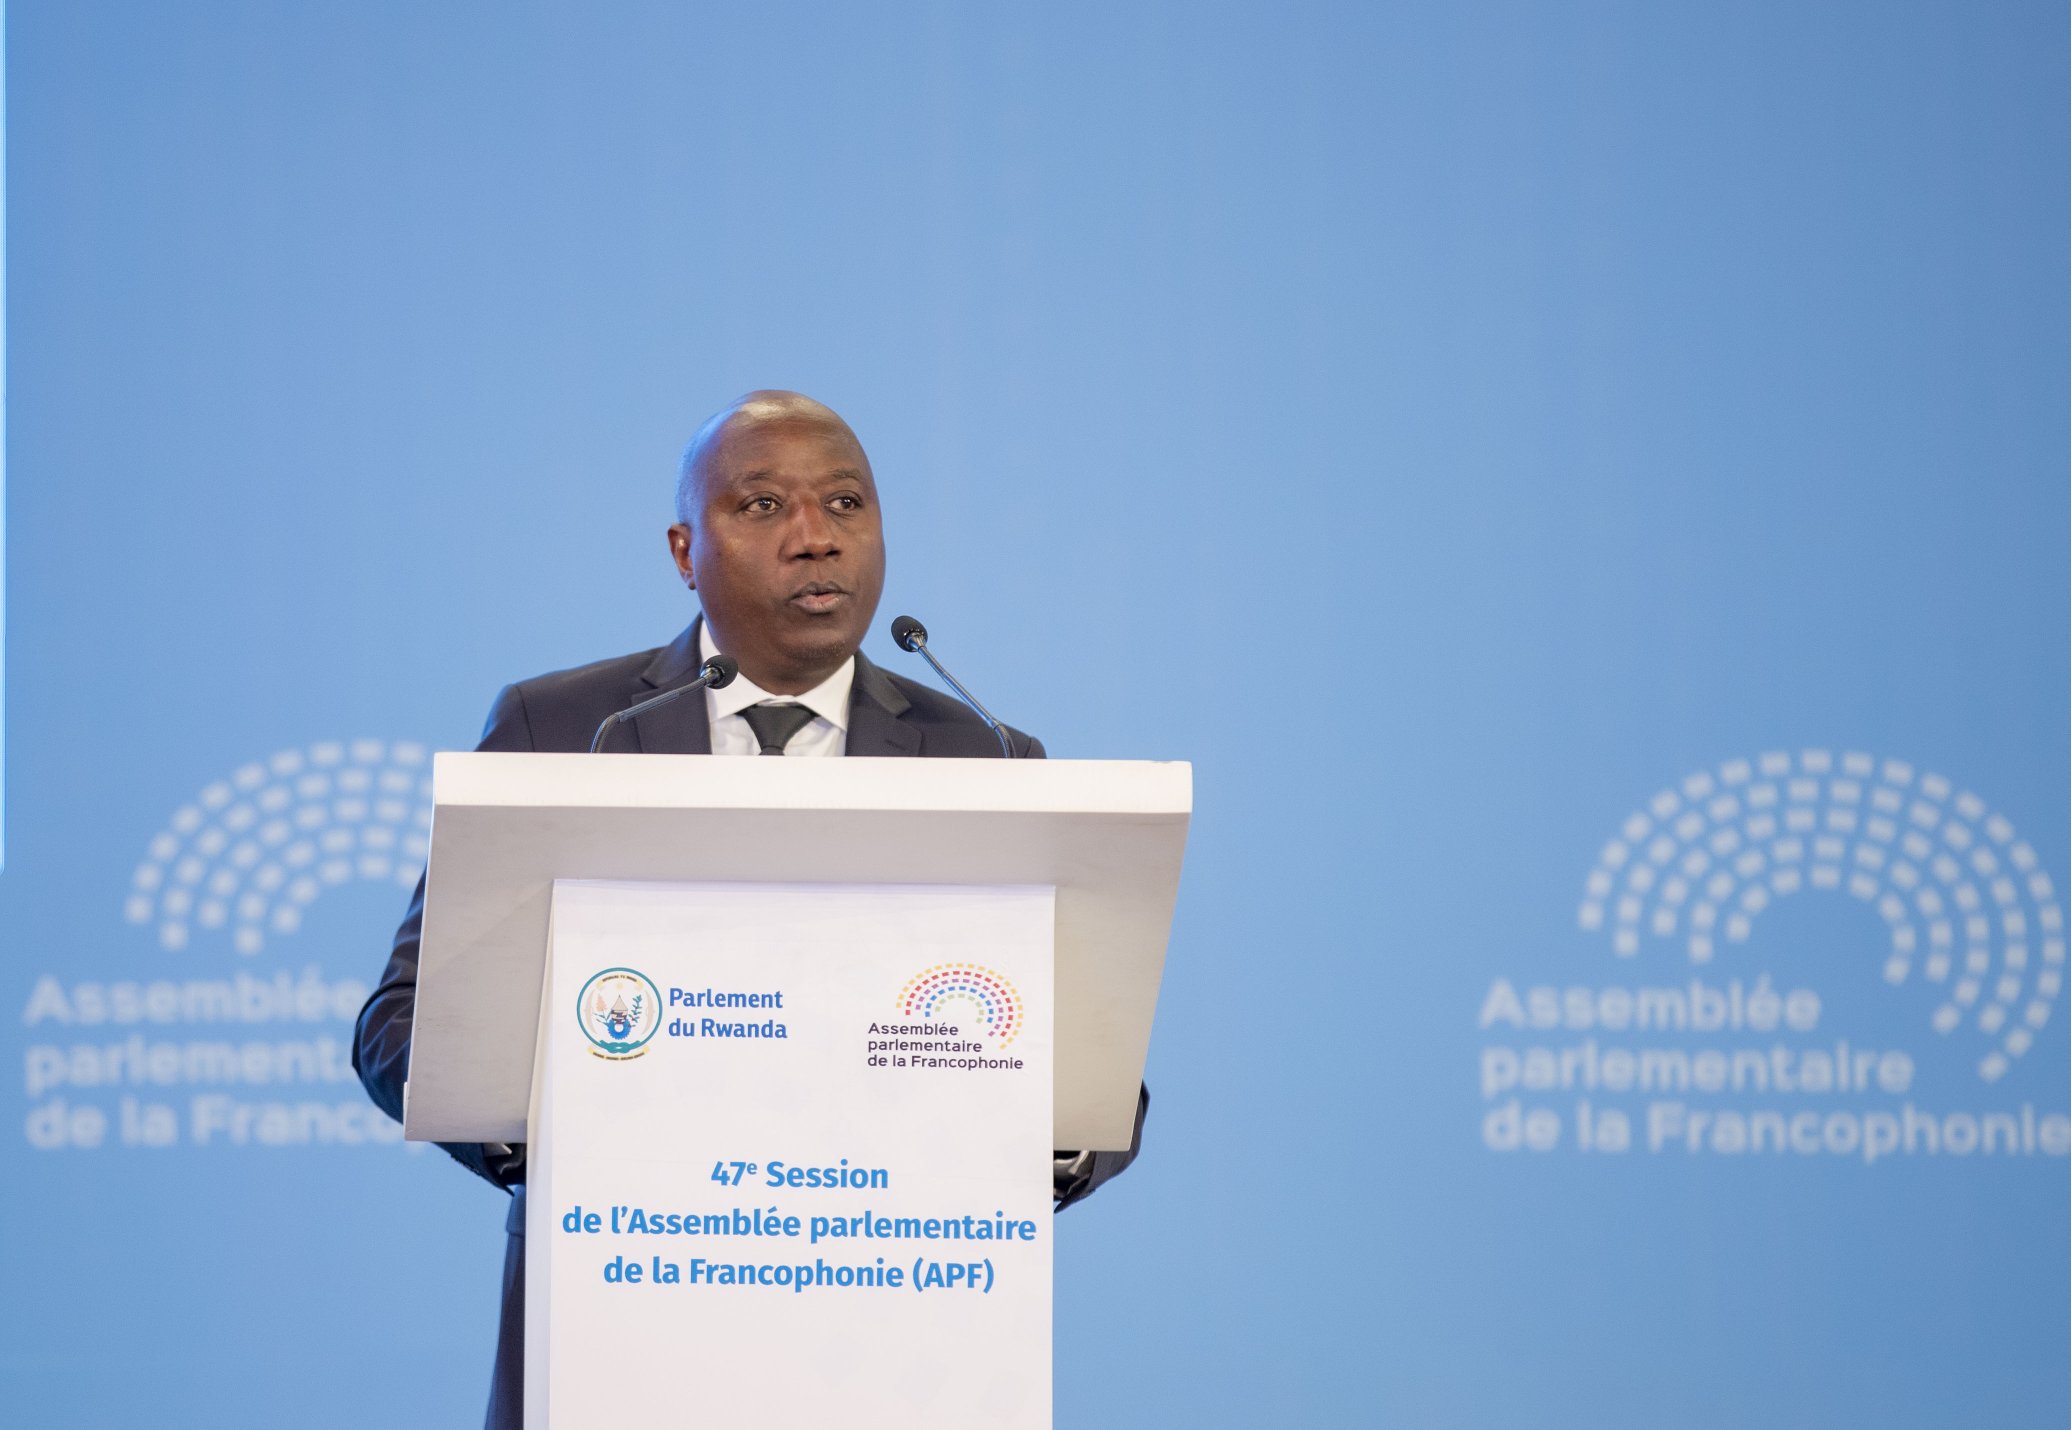 Prime Minister Edouard Ngirente delivers remarks while officially opening the 47th Plenary Session of the Parliamentary Assembly of La Francophonie  in Kigali on Friday July 8. Courtesy